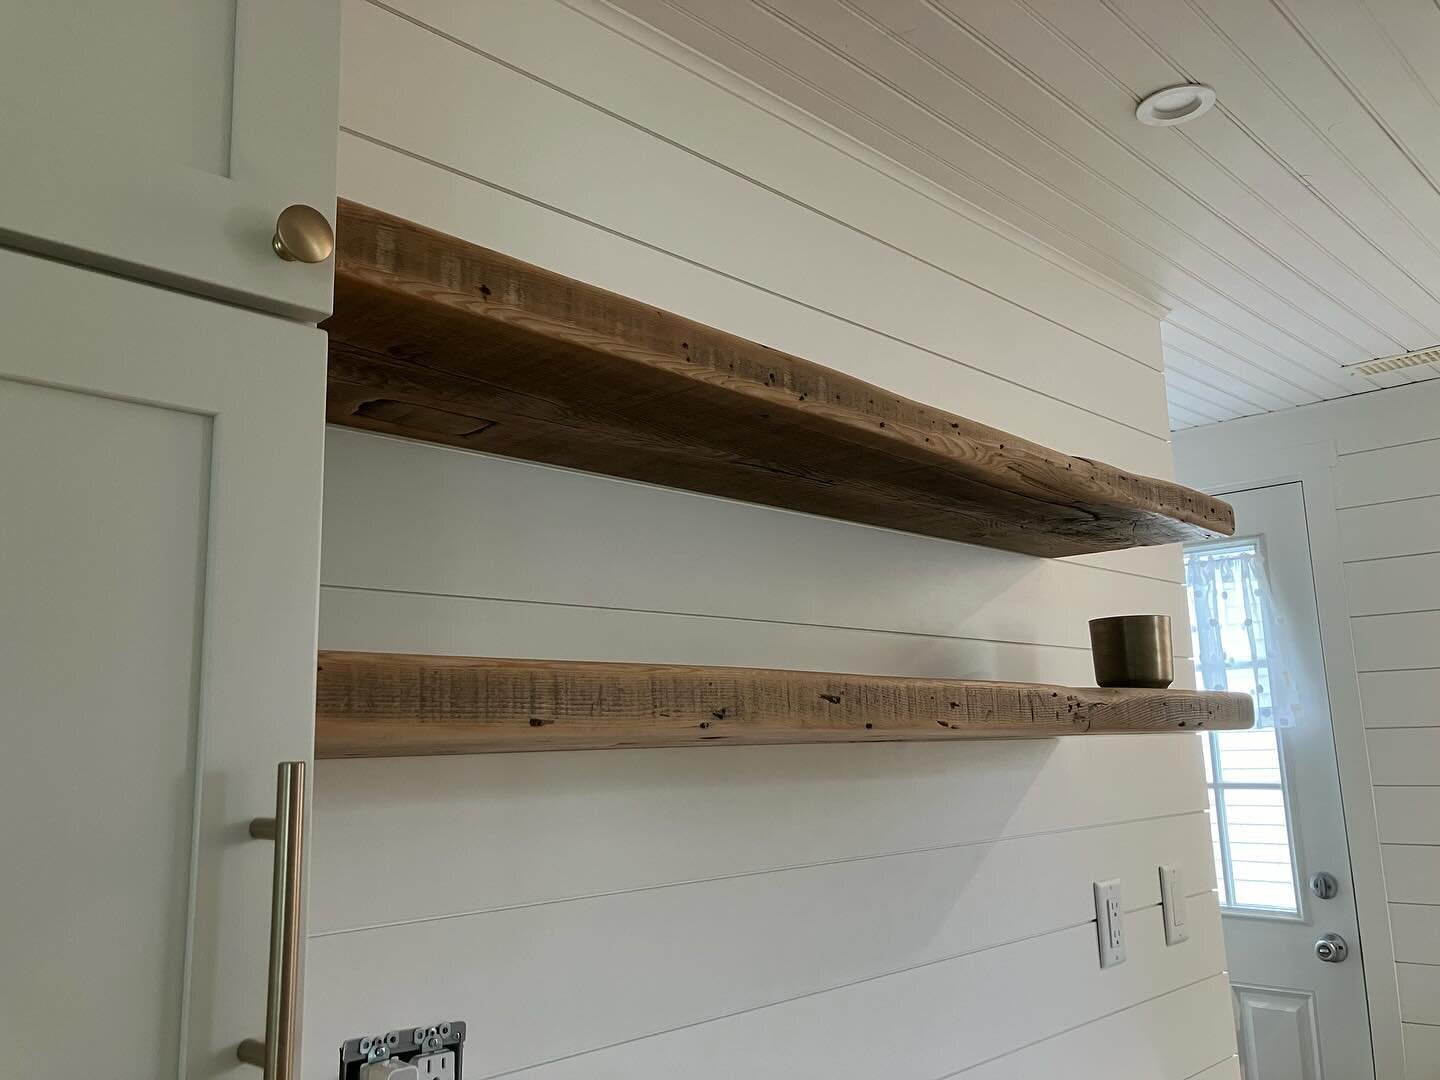 Reclaimed floating shelves for a  beach cottage that brings back memories of bygone days&hellip;

Garden State Surf and Art
8101 Long Beach Boulevard
Long Beach Township, NJ 08008

DM: @gardenstatesurf 
Email: gardenstatesurf@gmail.com
Call/text: (60